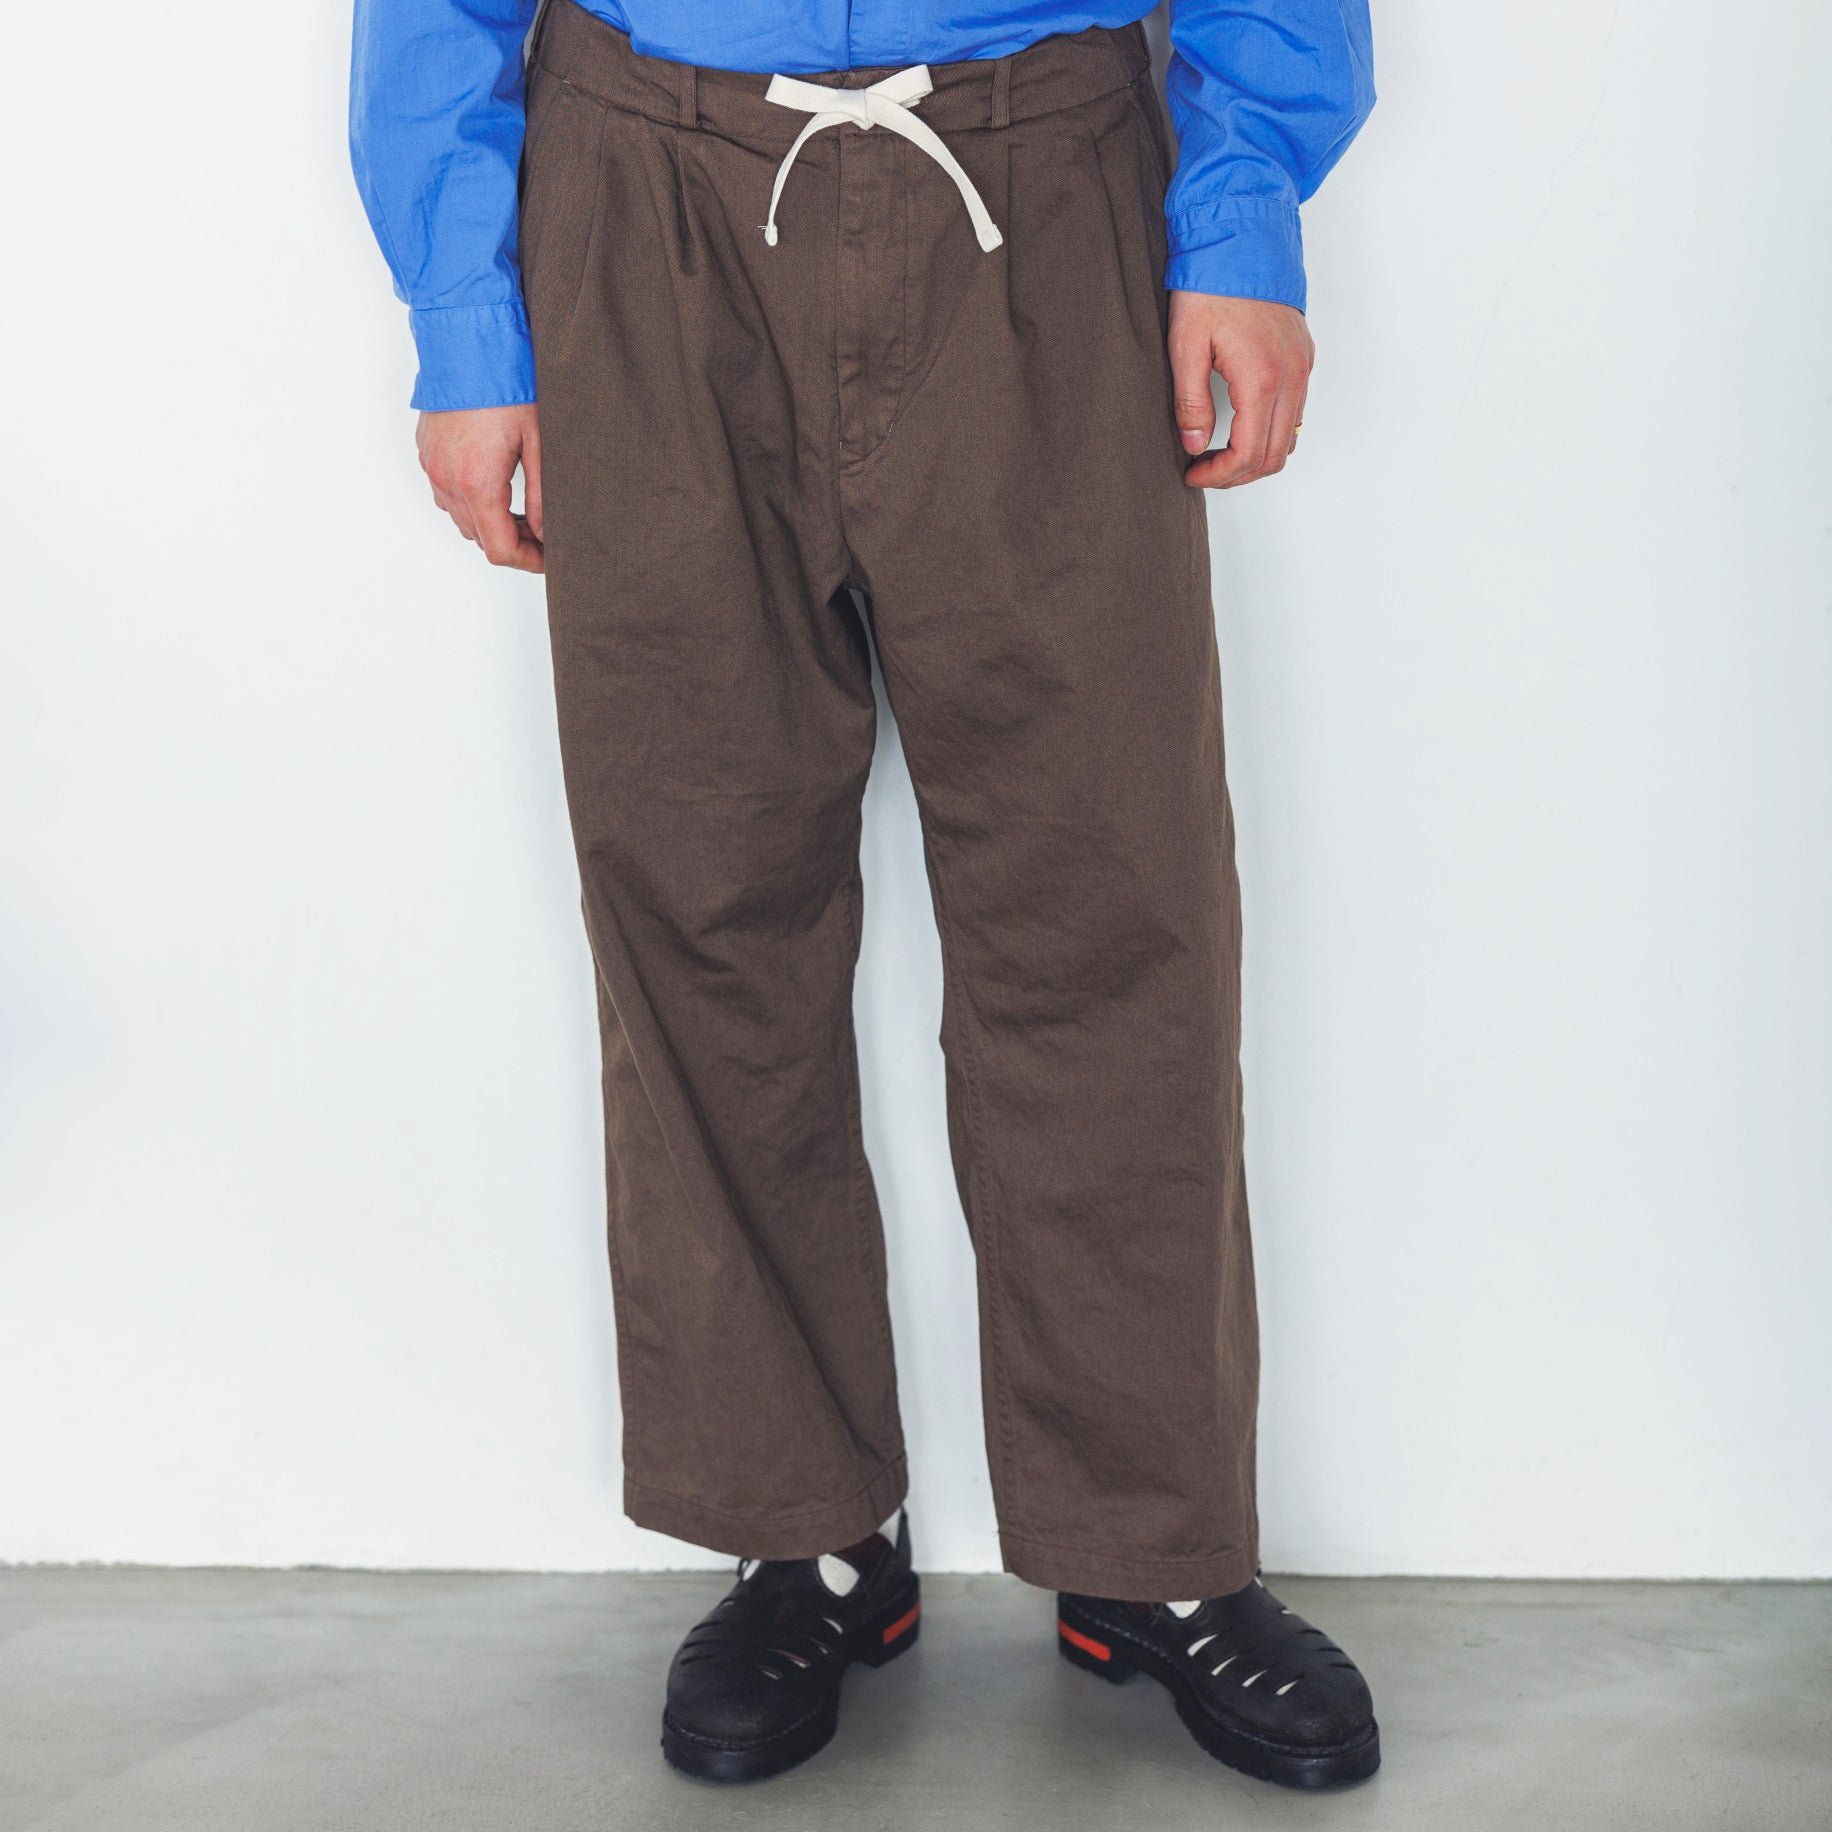 No:BE-03_BROWN | Name:BAGS EASY PANTS-VINTAGE CHINO | Color:Brown【CATTA_カッタ】【入荷予定アイテム・入荷連絡可能】